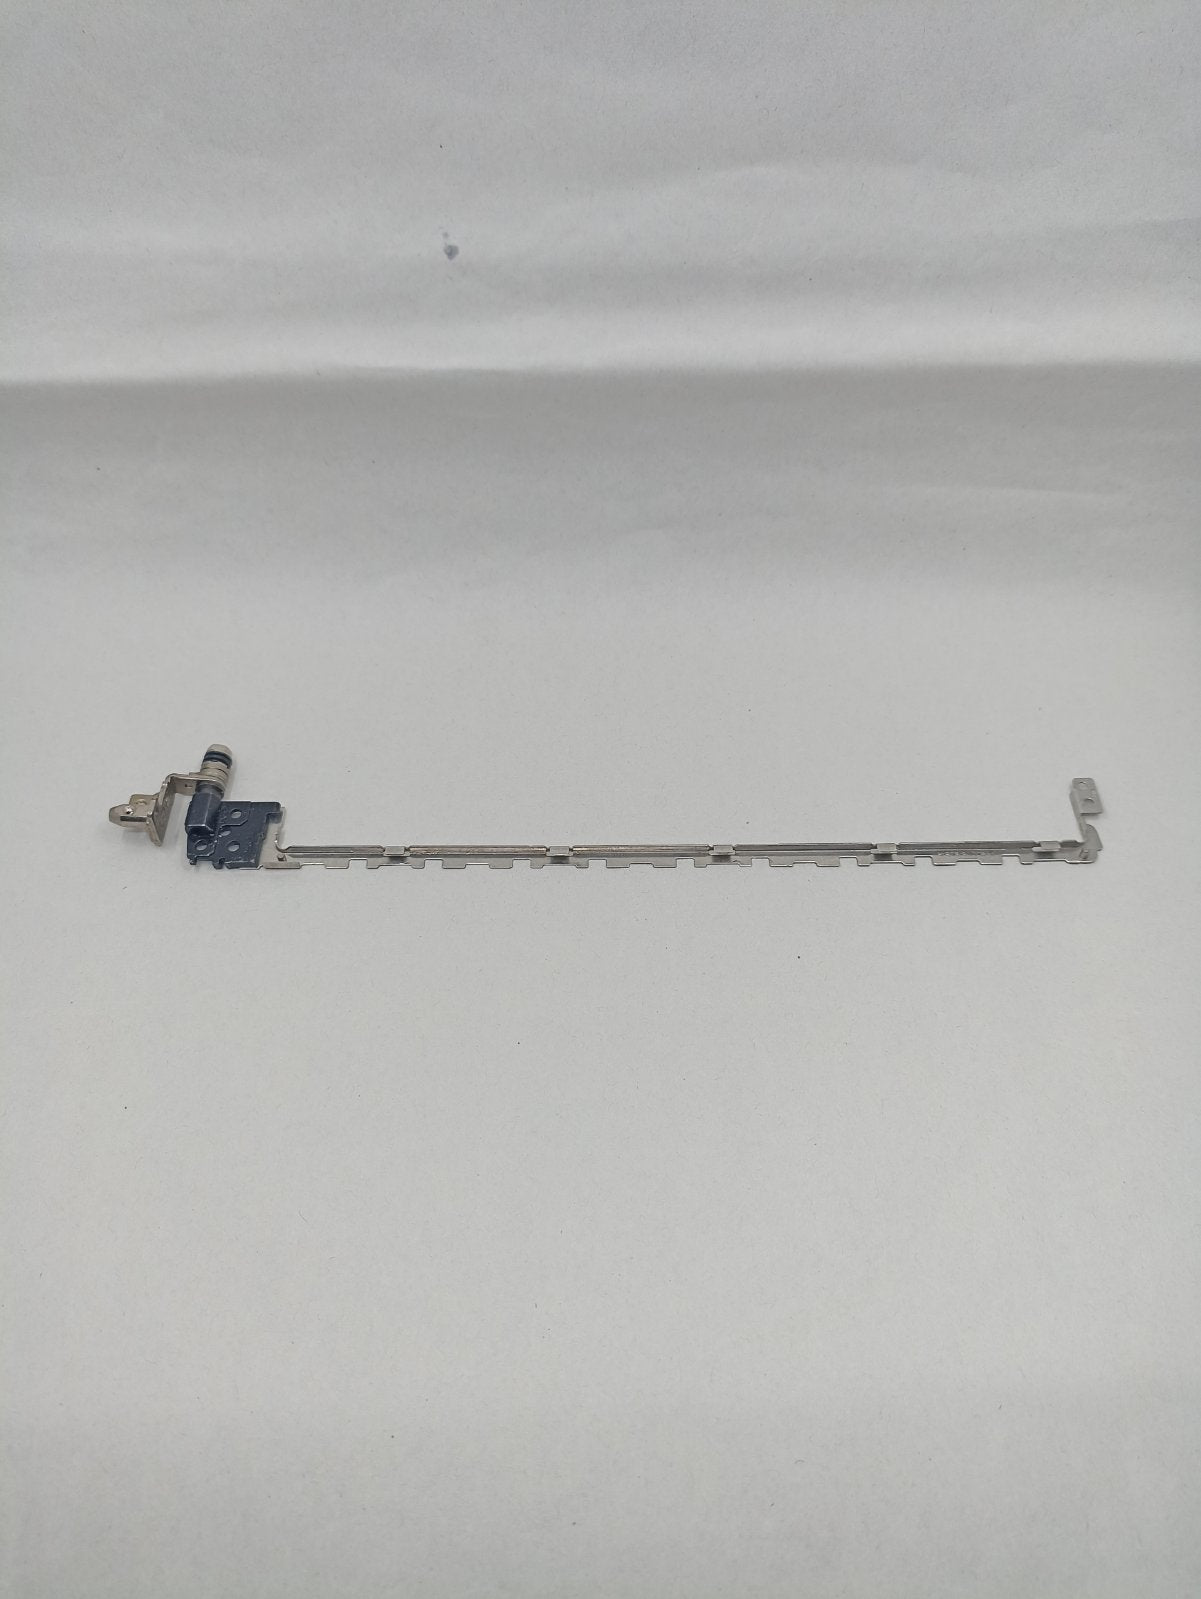 Replacement Hinge for Lenovo Thinkpad P53 WL